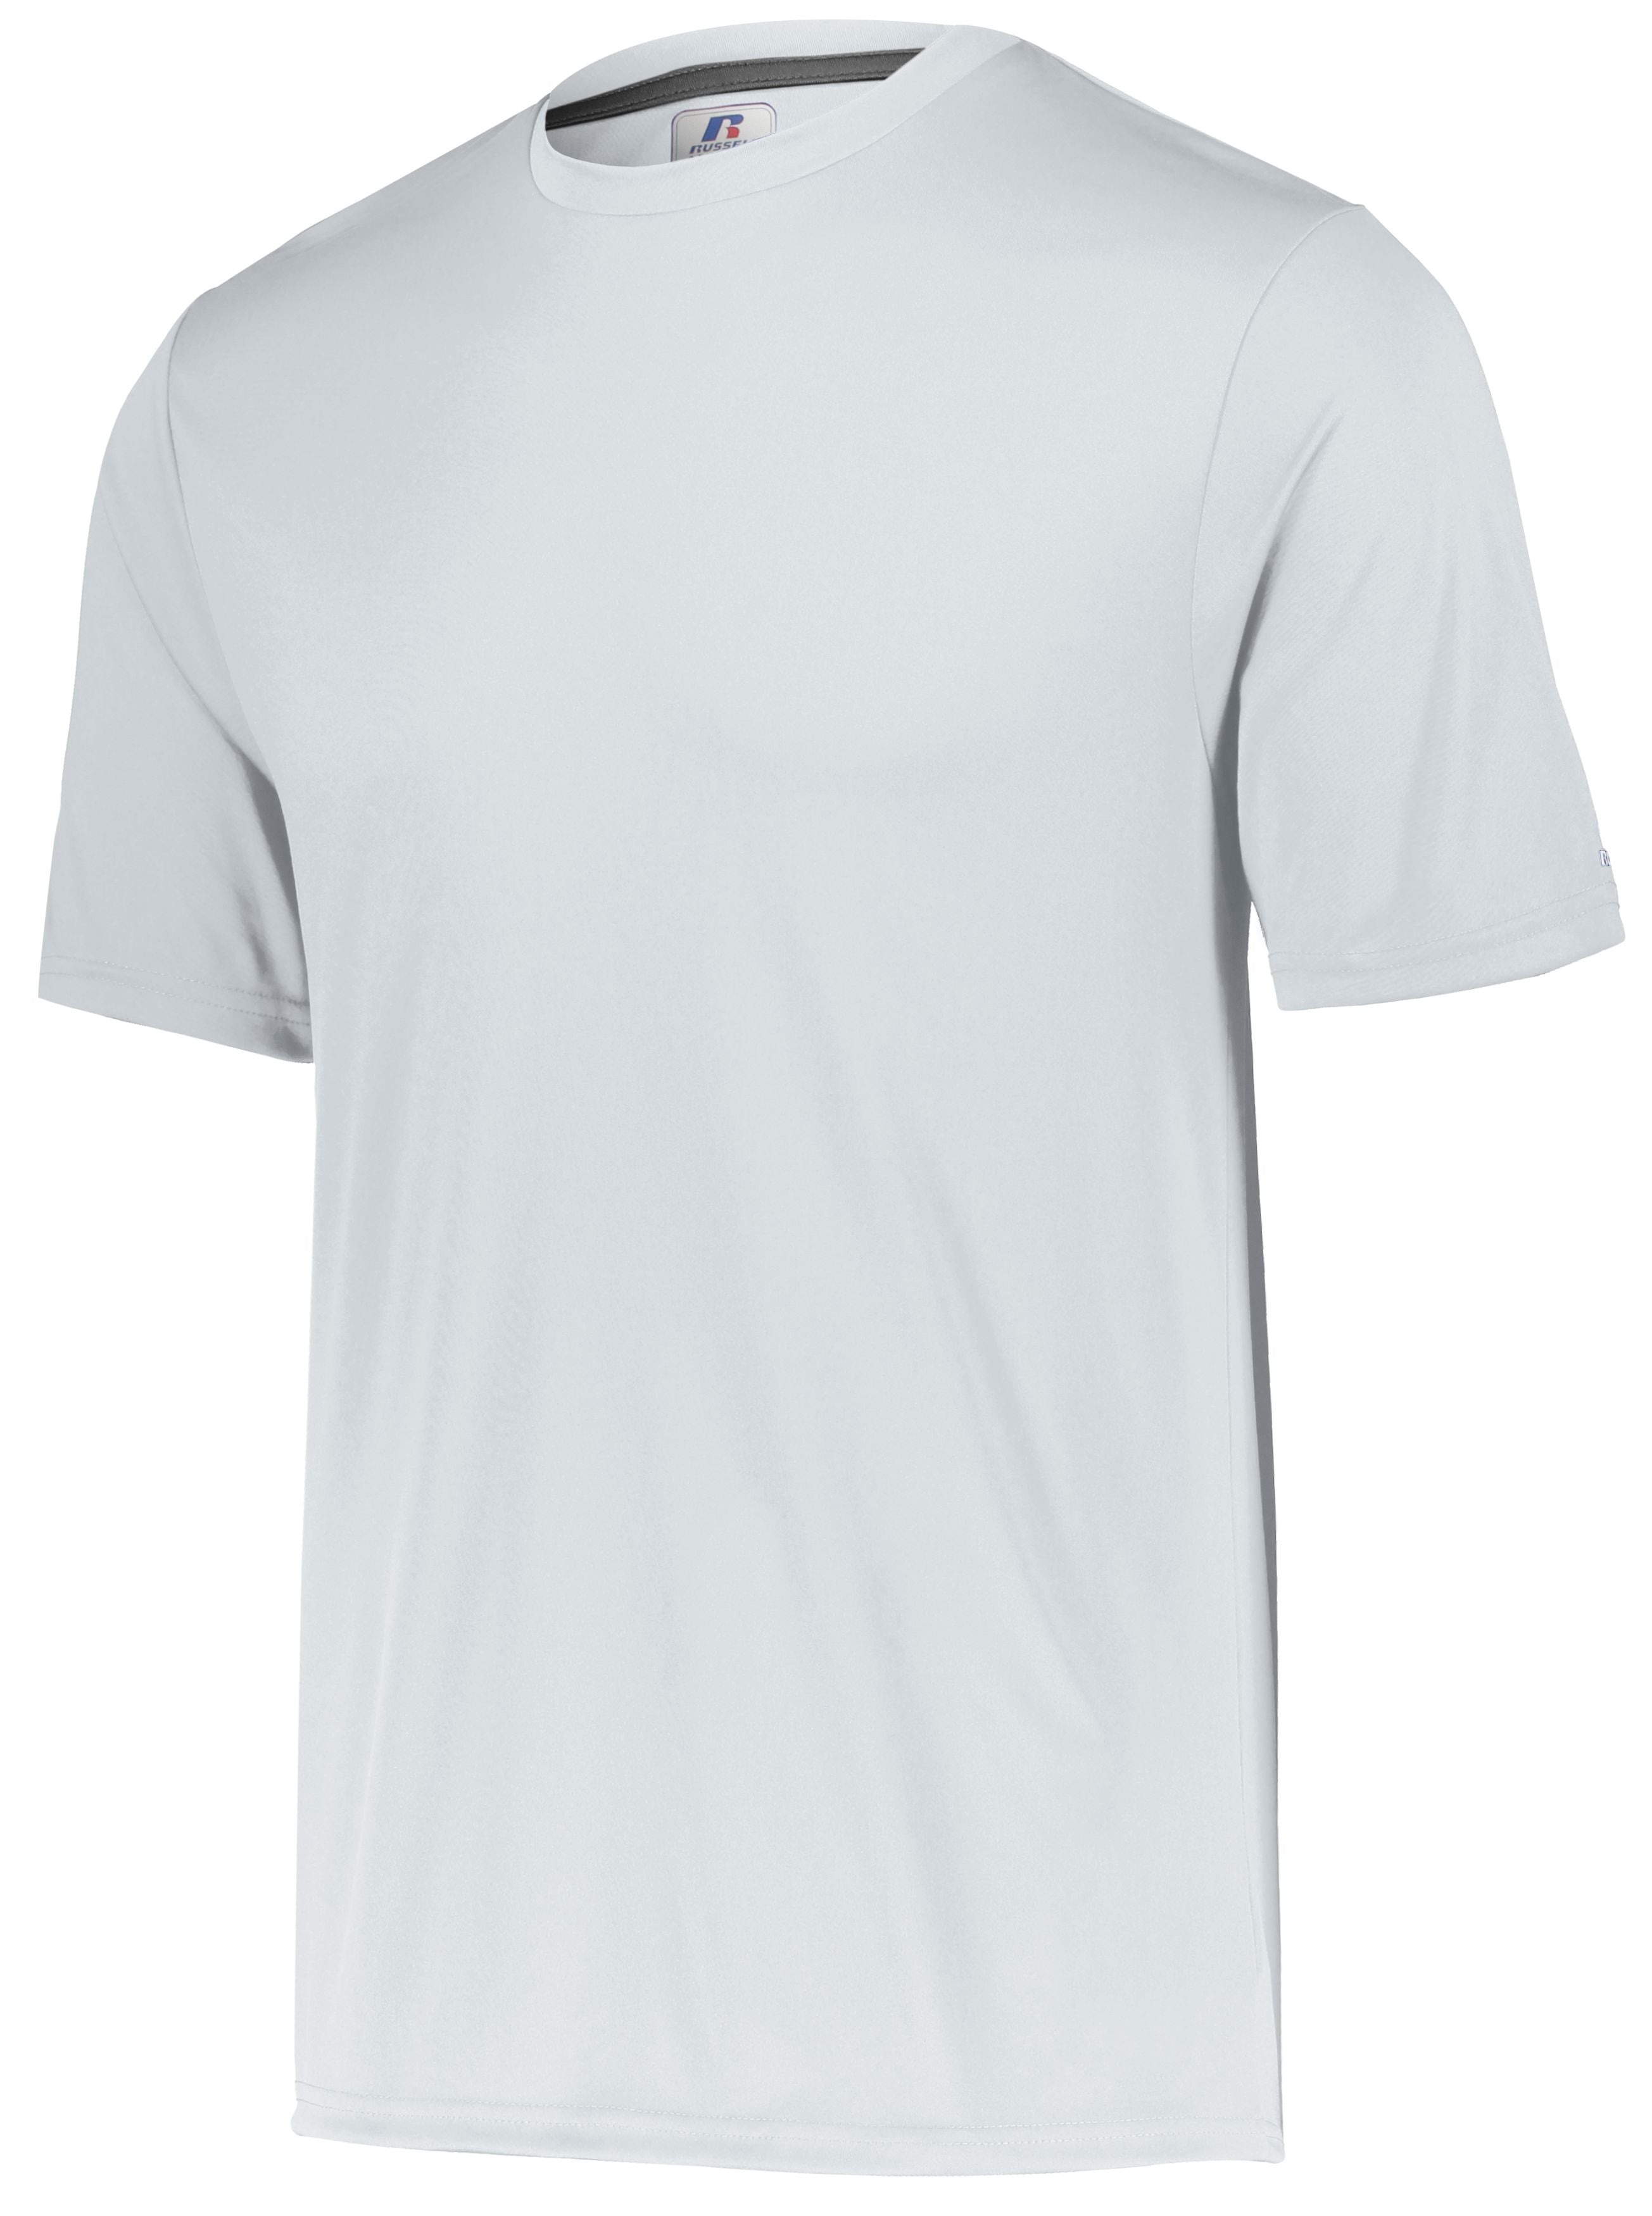 Russell Athletic Dri-Power Core Performance Tee in White  -Part of the Adult, Adult-Tee-Shirt, T-Shirts, Russell-Athletic-Products, Shirts product lines at KanaleyCreations.com